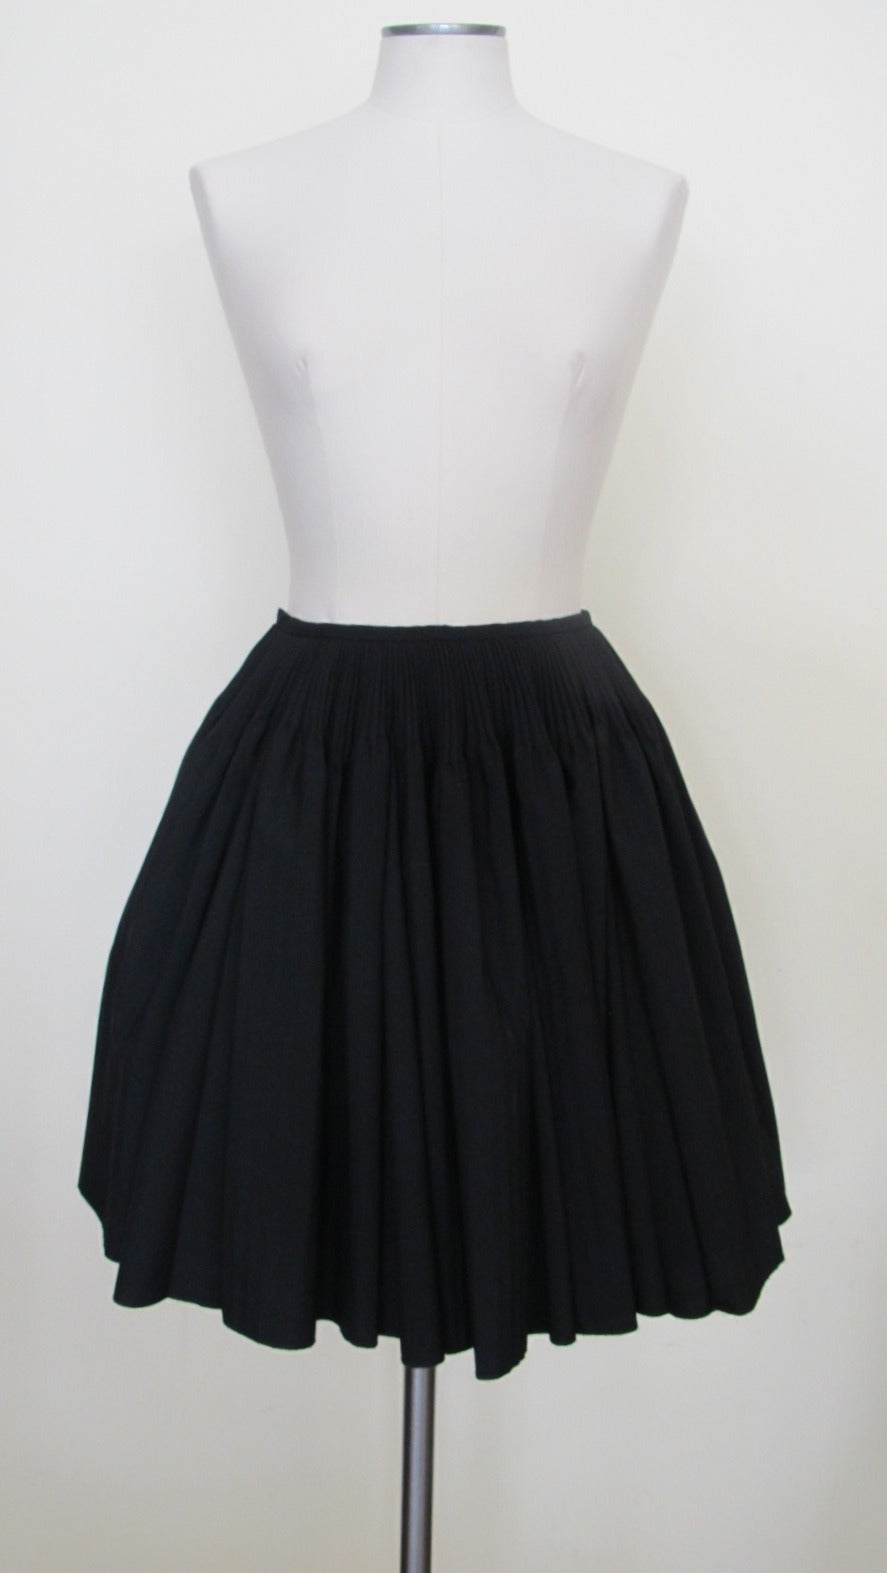 Exquisite fine black wool Alaia skirt with 3.5 inch plisse design below waist band. The skirt is lined in a heavy taffeta like polyester which gives a strong body to the design of the charming and chic skirt linking. The Taffeta Polyester lining is